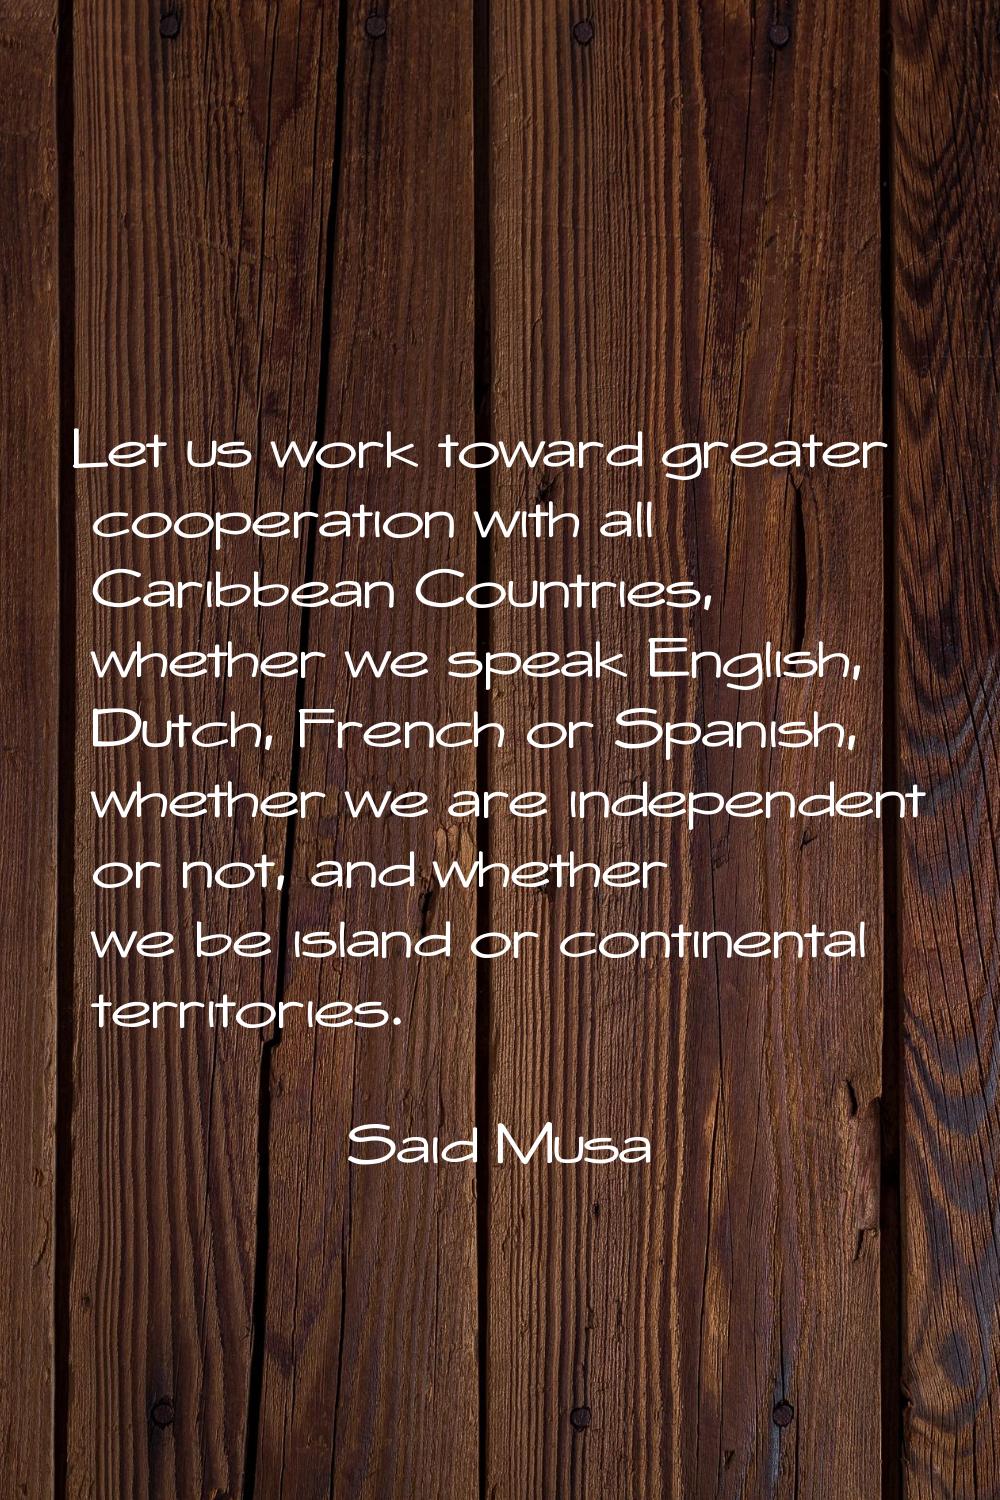 Let us work toward greater cooperation with all Caribbean Countries, whether we speak English, Dutc